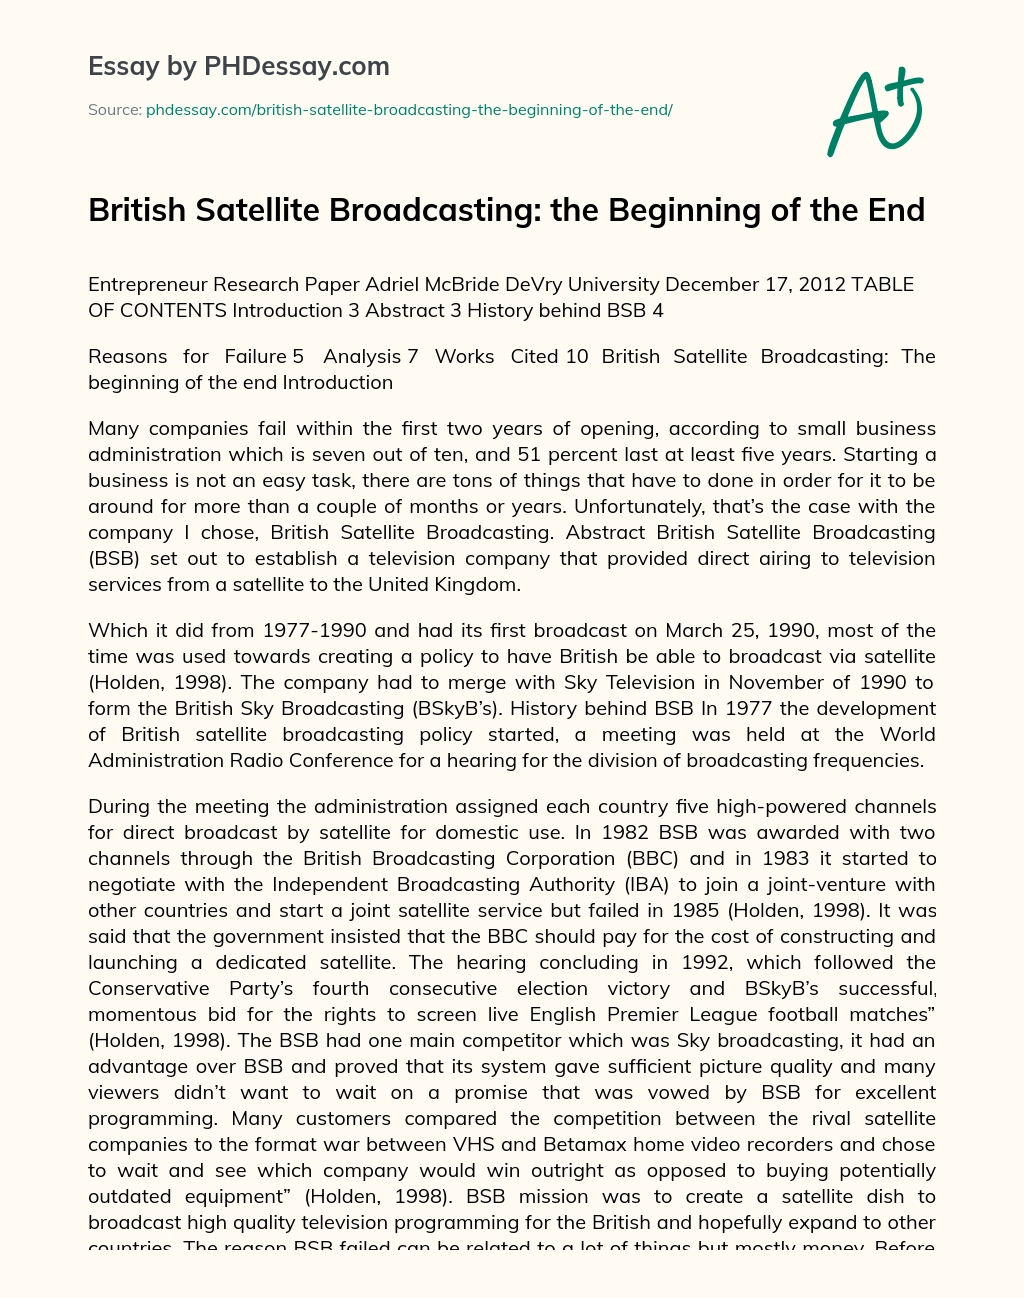 British Satellite Broadcasting: the Beginning of the End essay